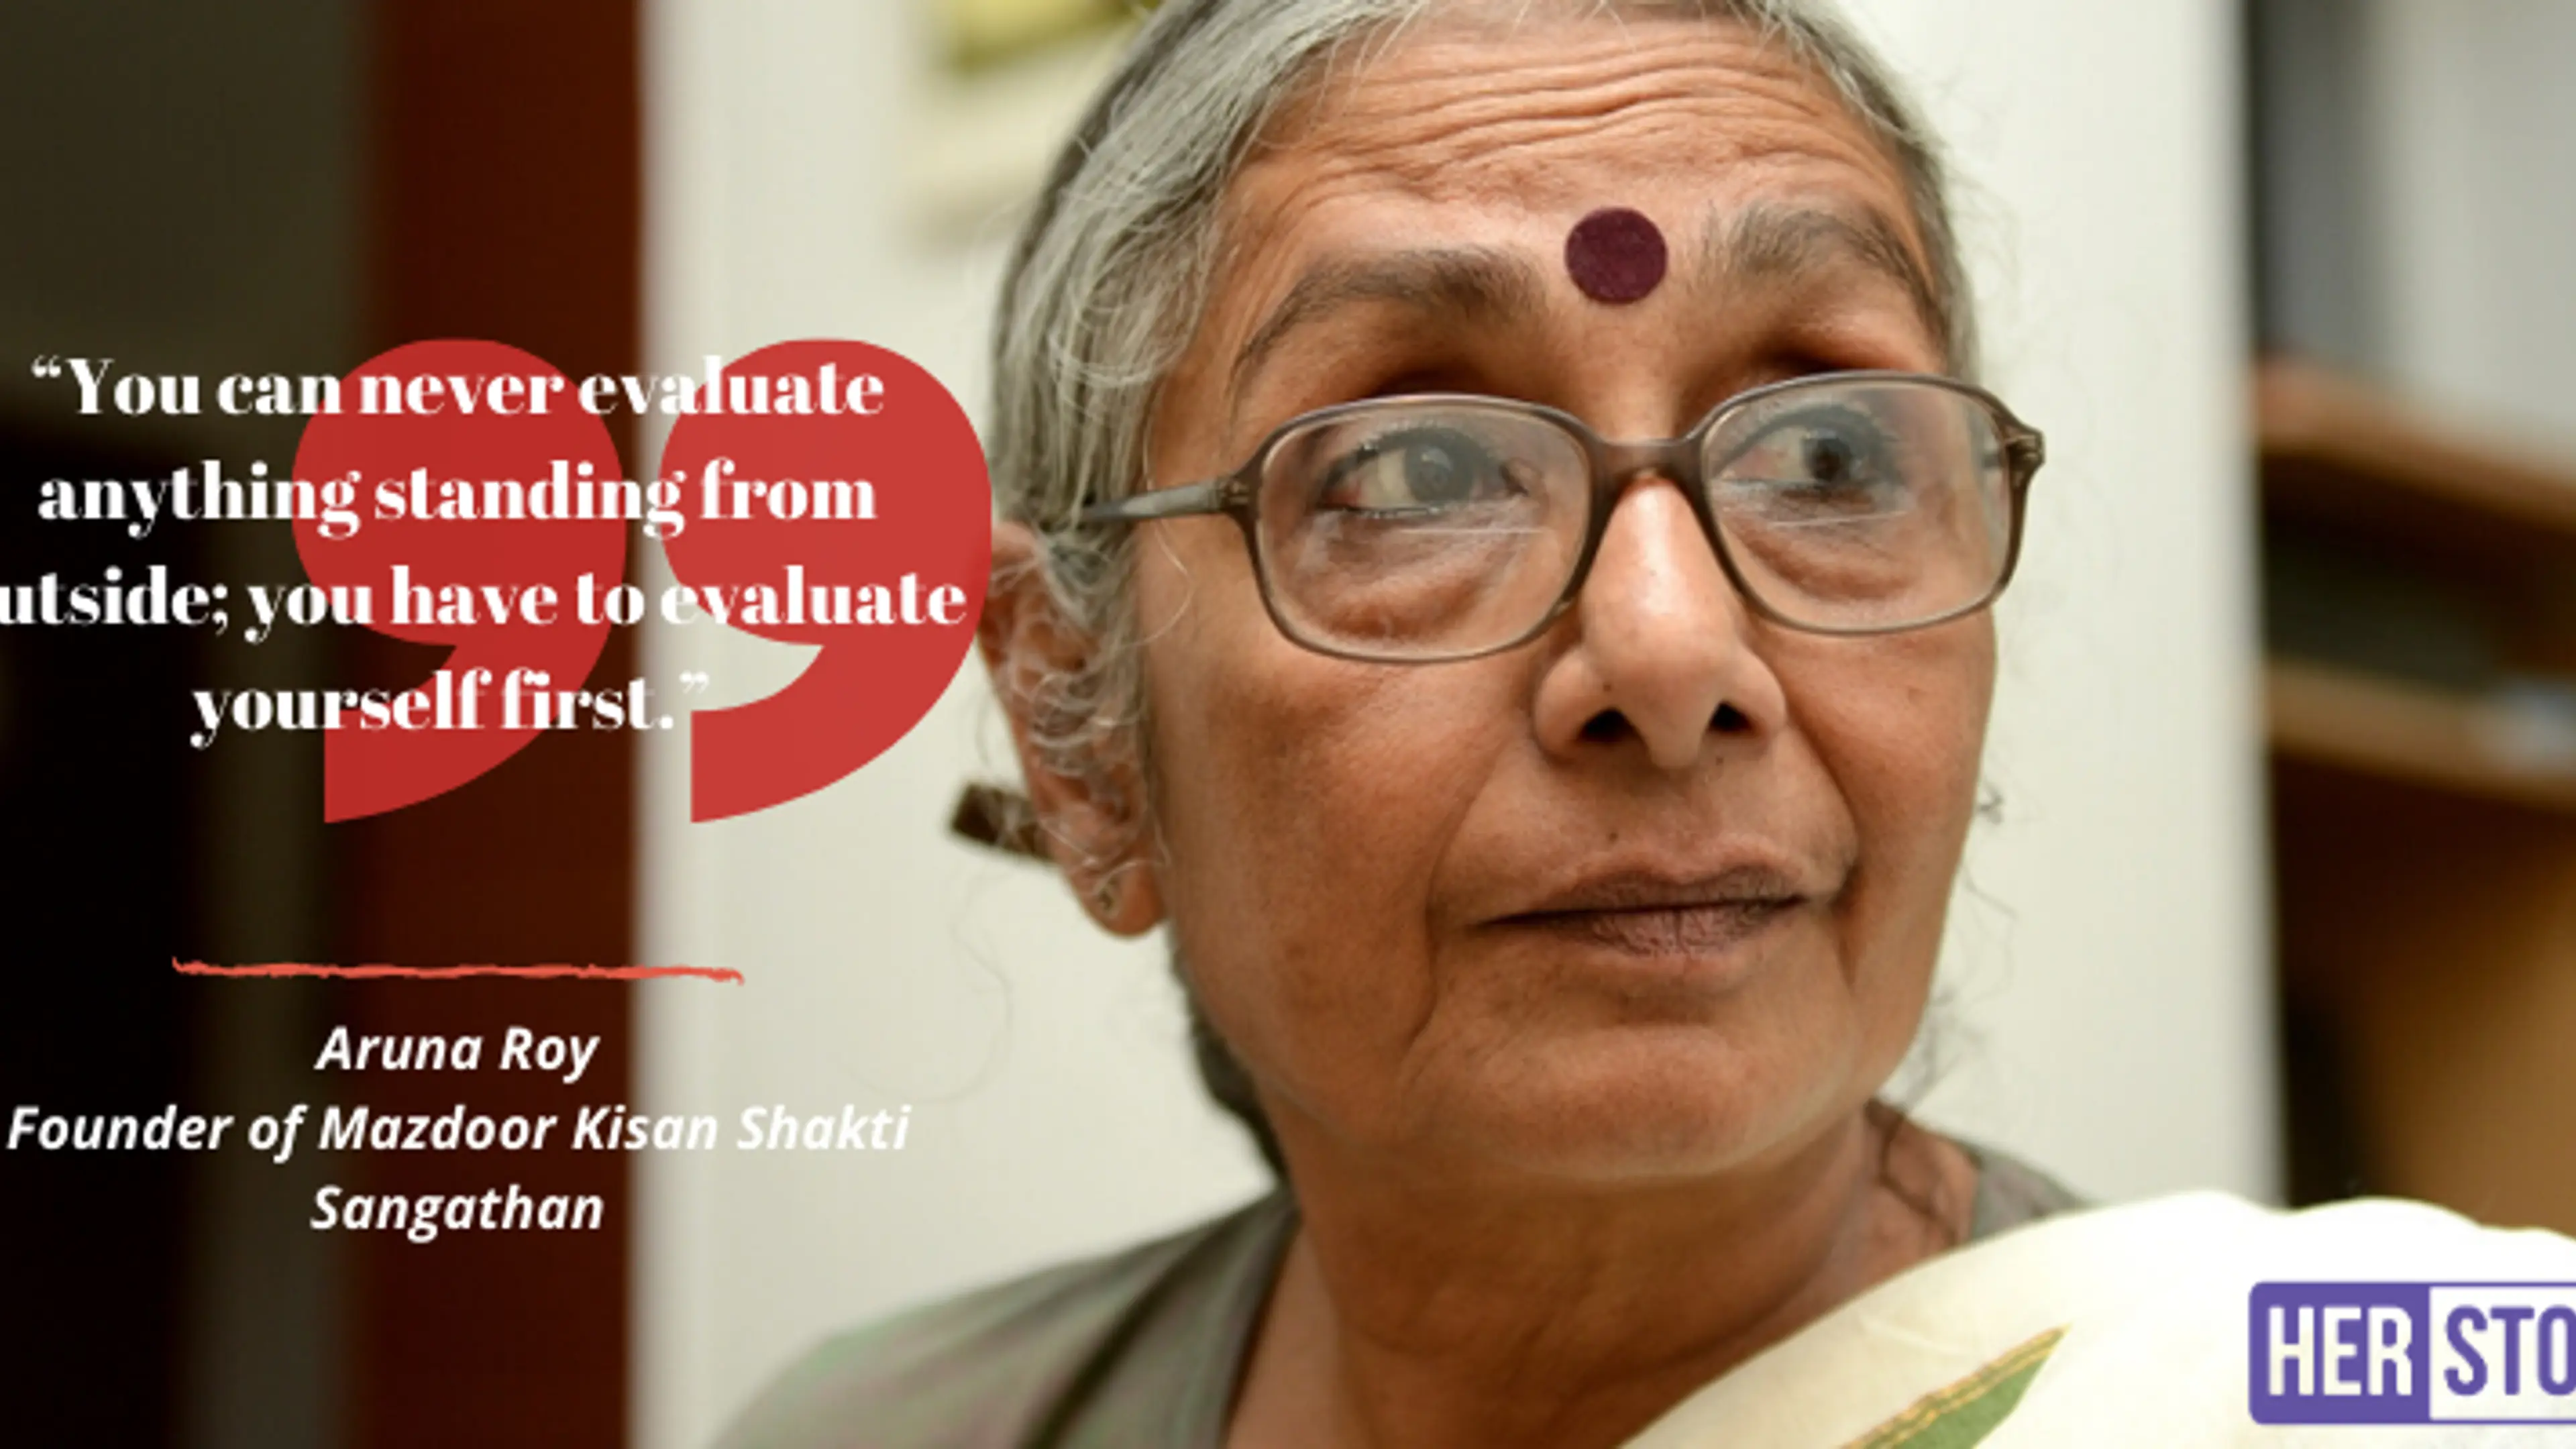 12 inspiring quotes by Indian women activists to be the change you want to see